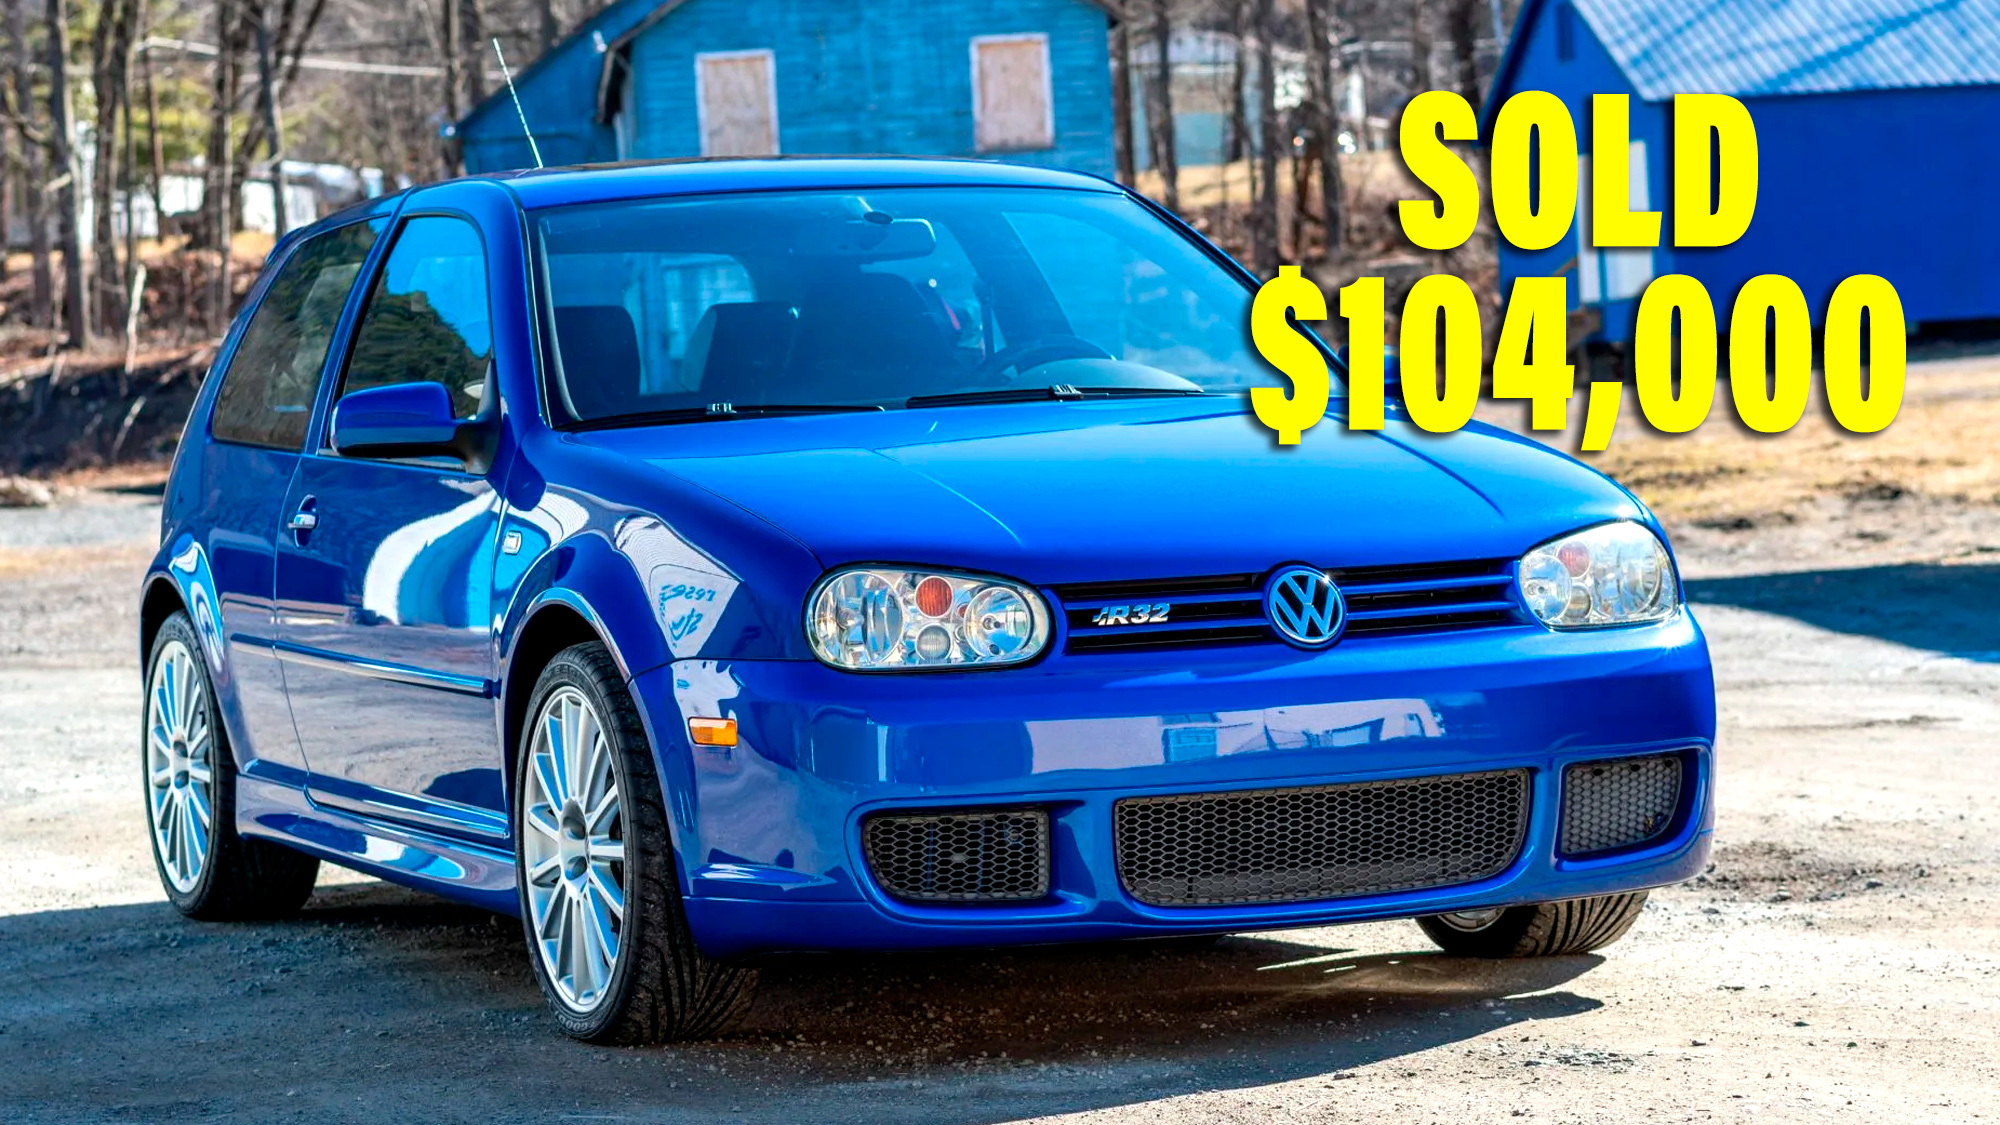 Meet The $104K VW: 2004 Golf R32 With 97 Miles Finds New, Well